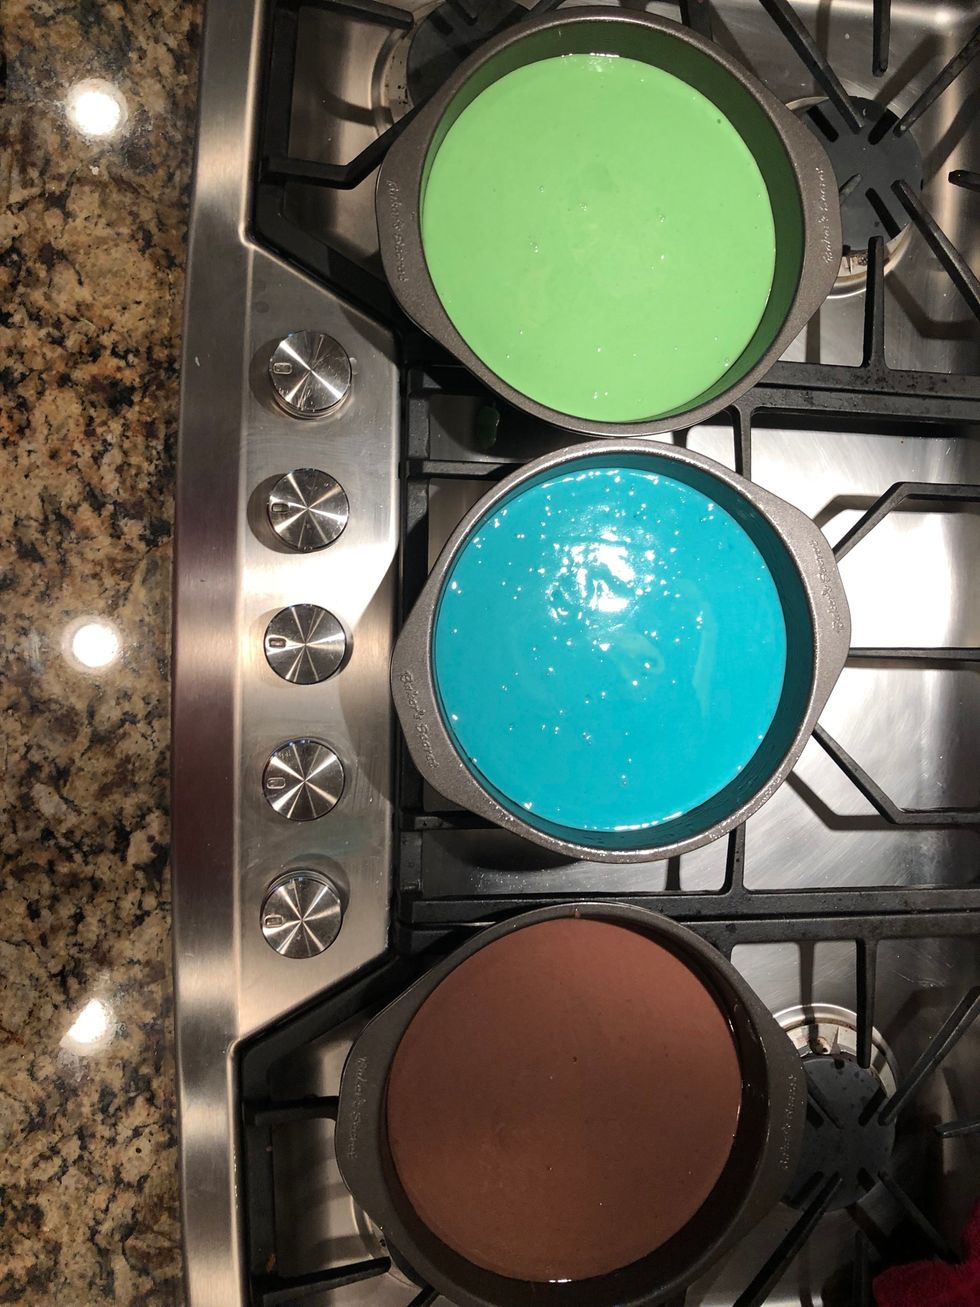 Pour other 3 colors into cake pans and bake for 18-20 minutes and then cool for 10 minutes.